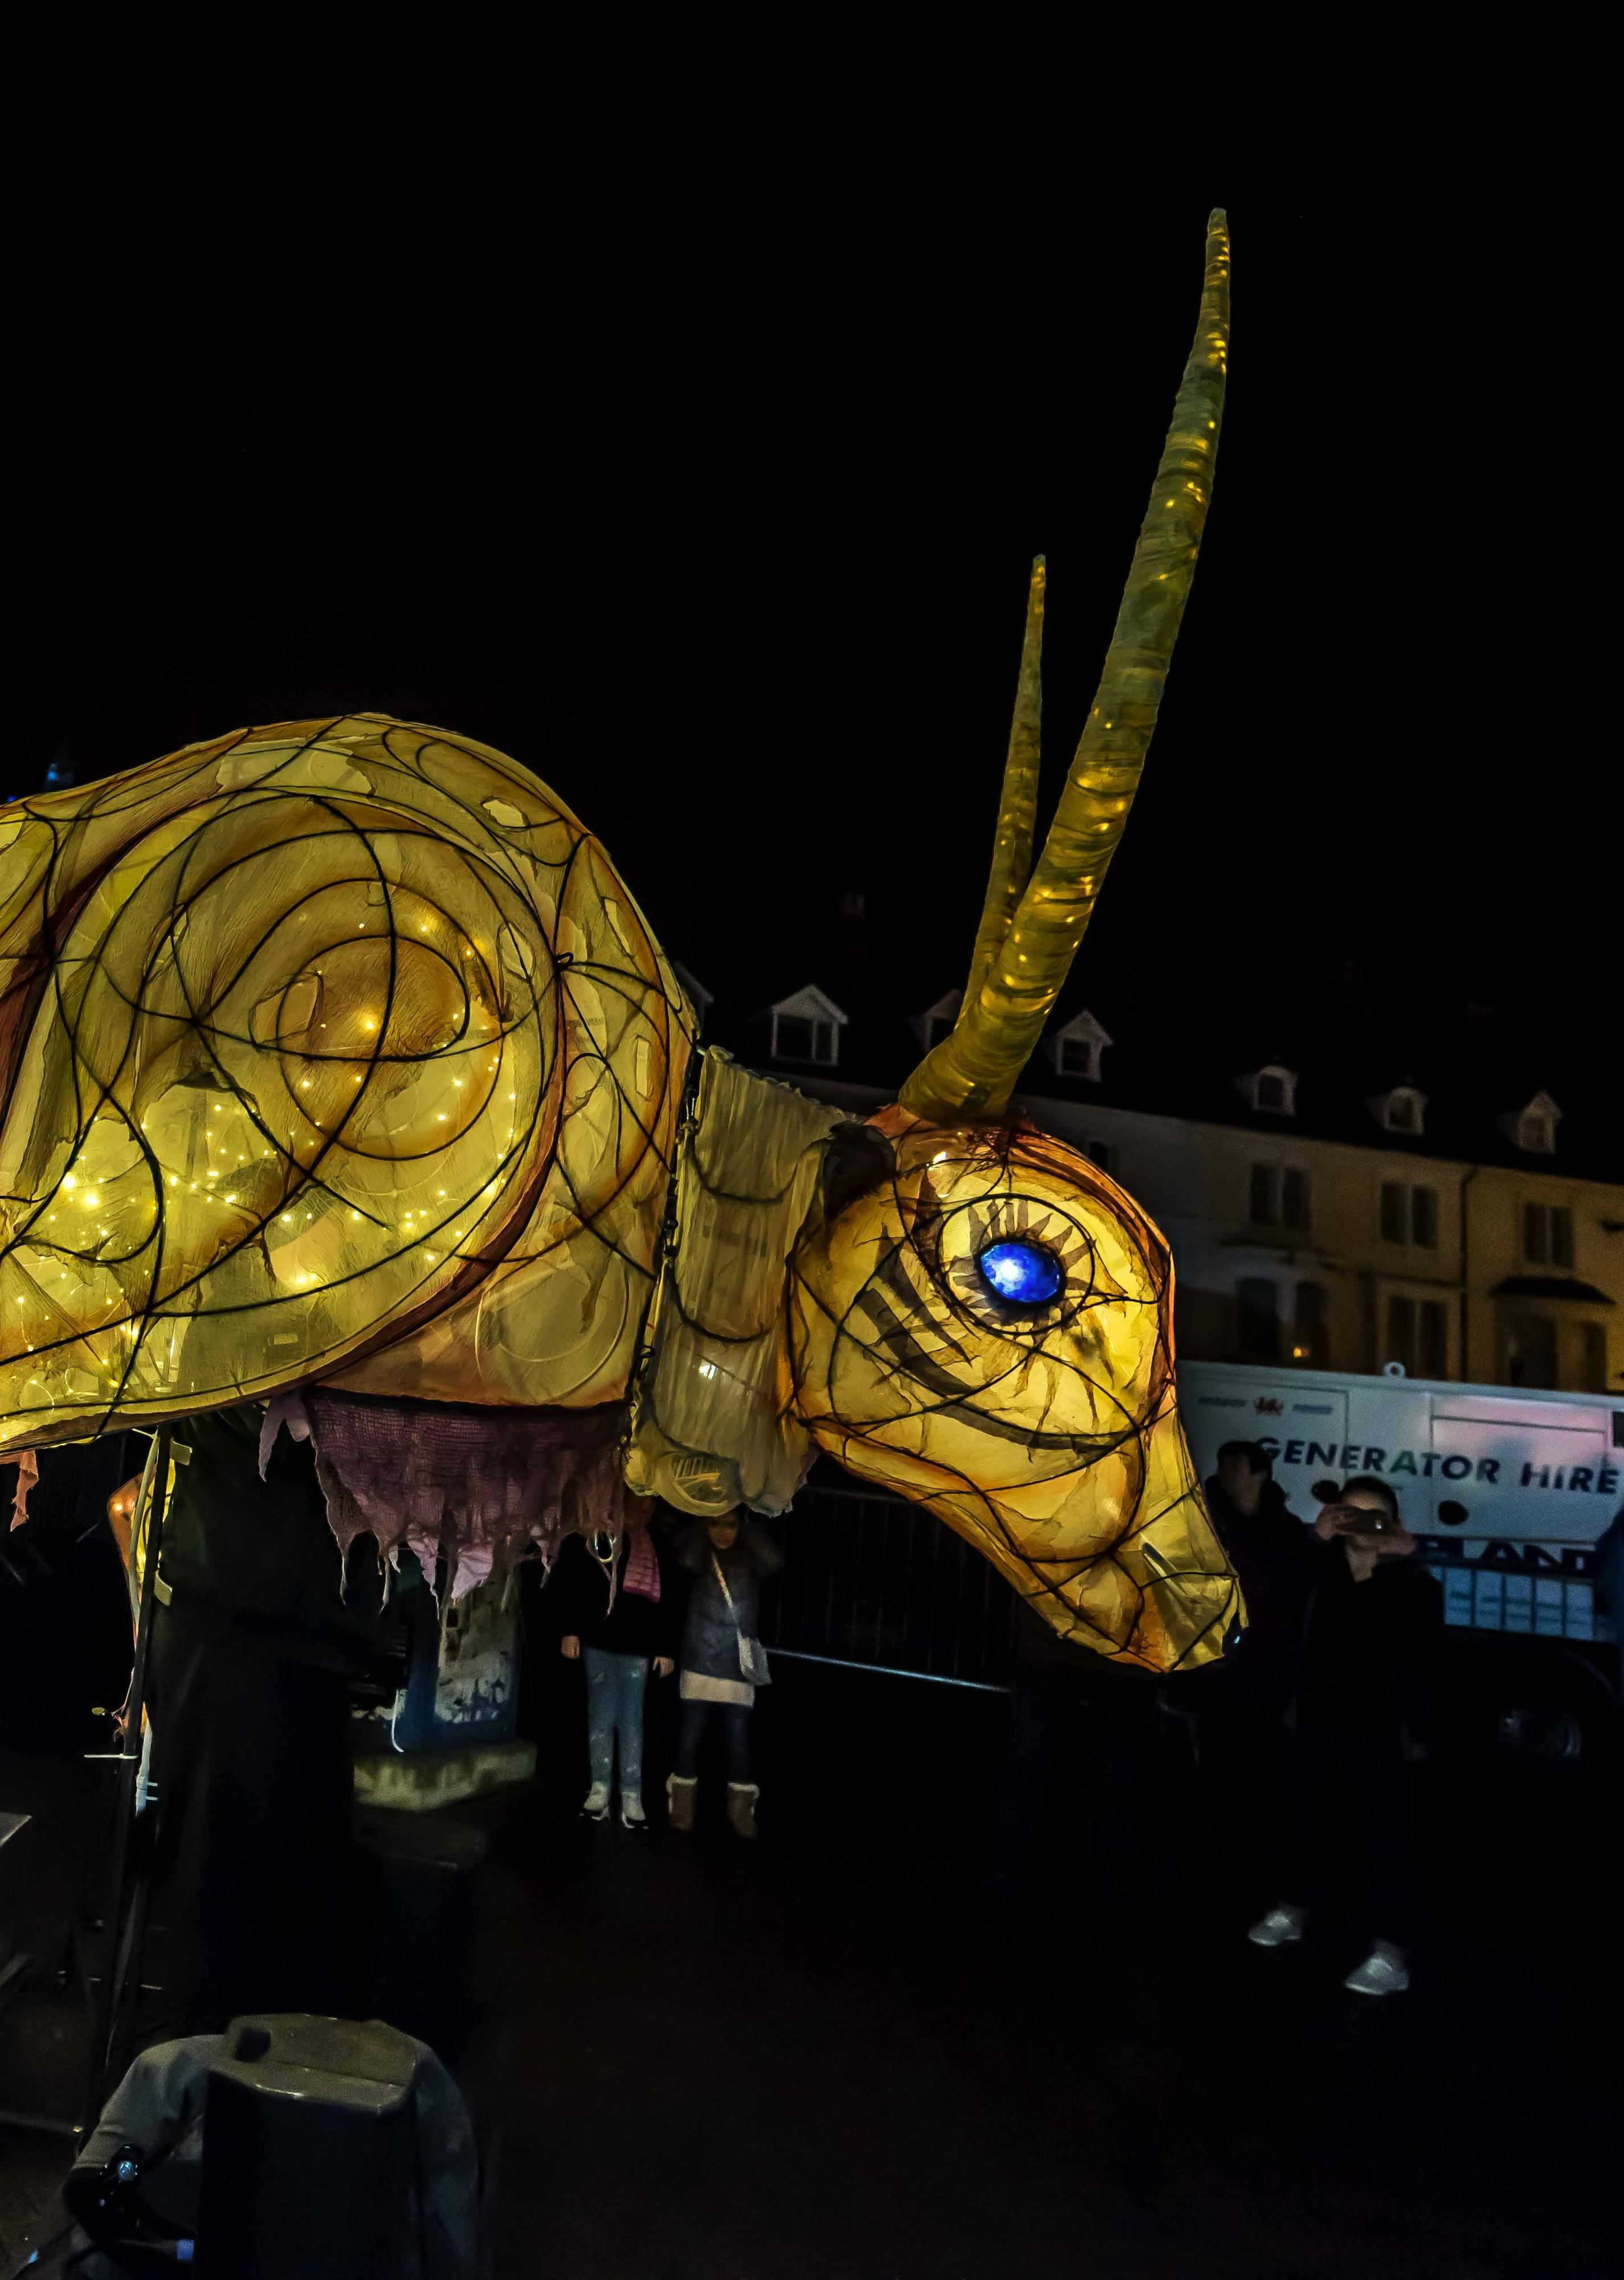 A large ox lit from within parading through a street